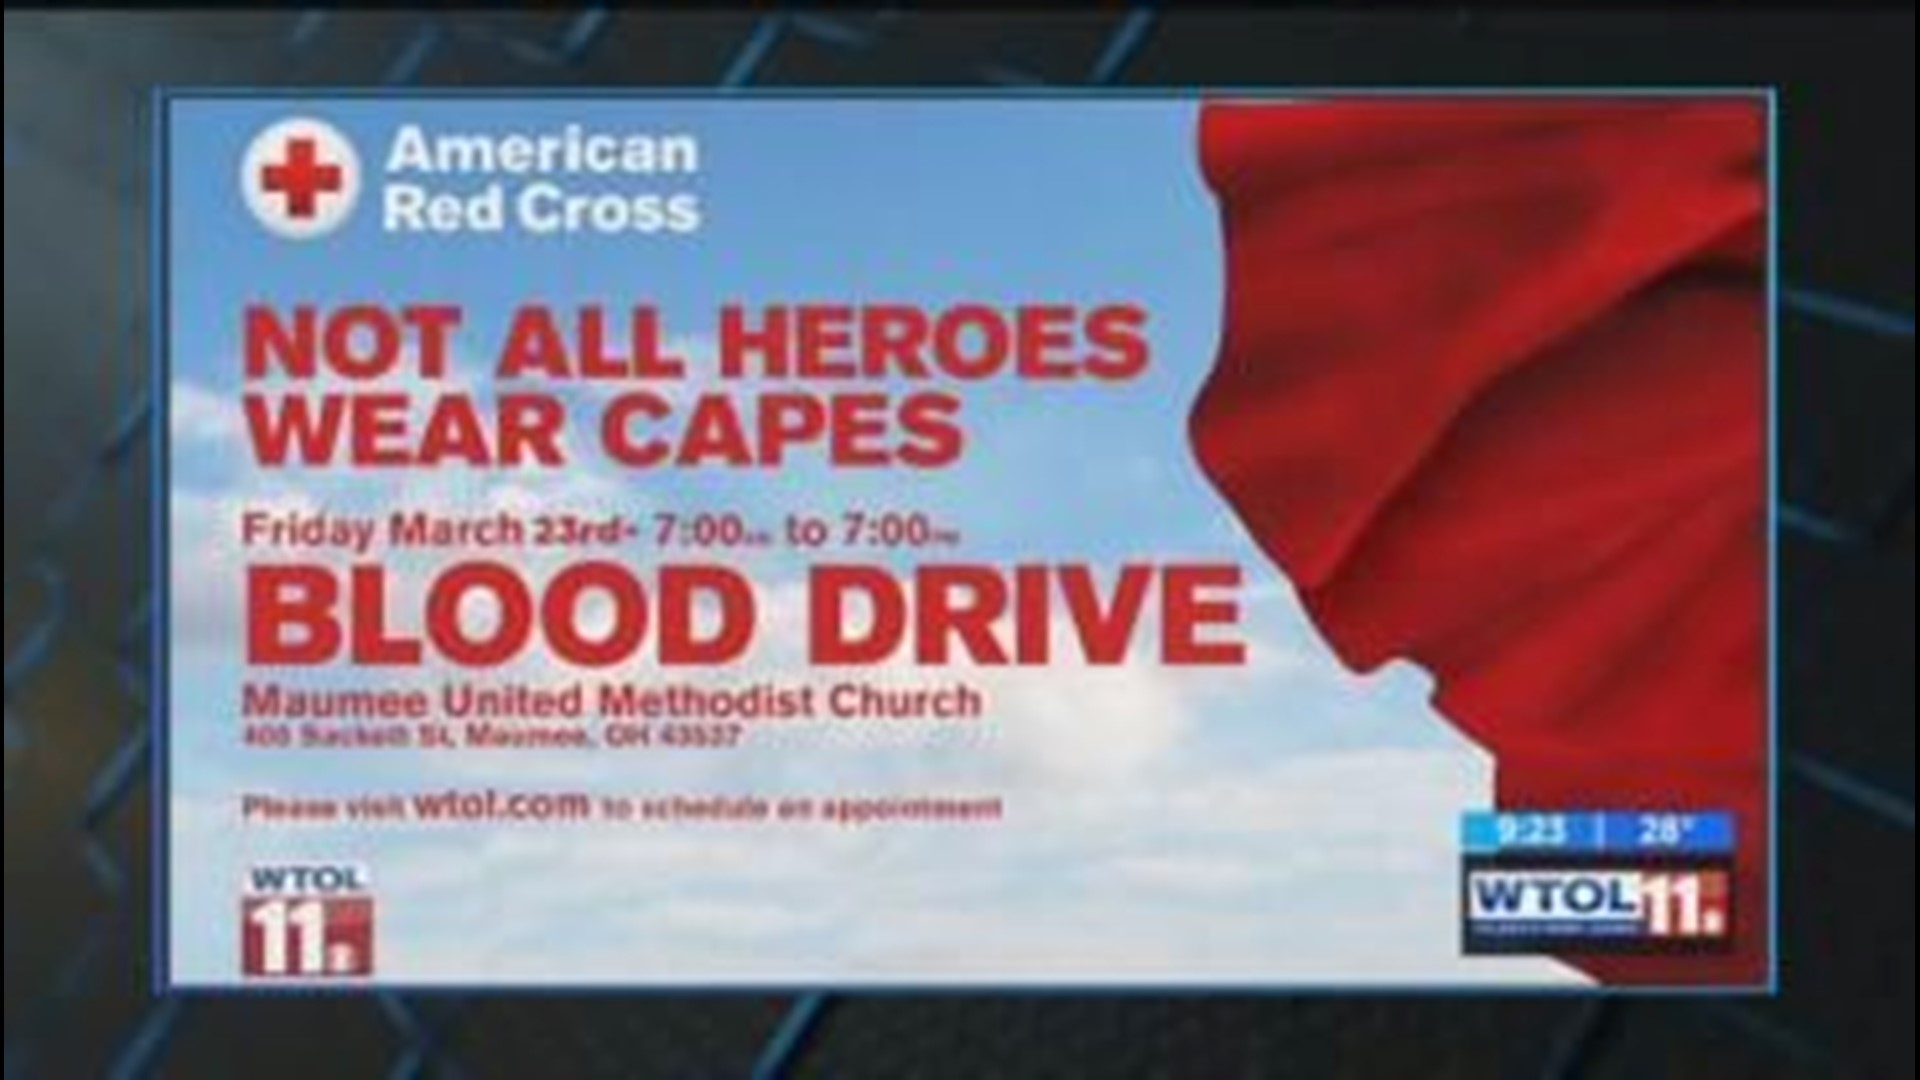 You can save lives at the WTOL blood drive Friday